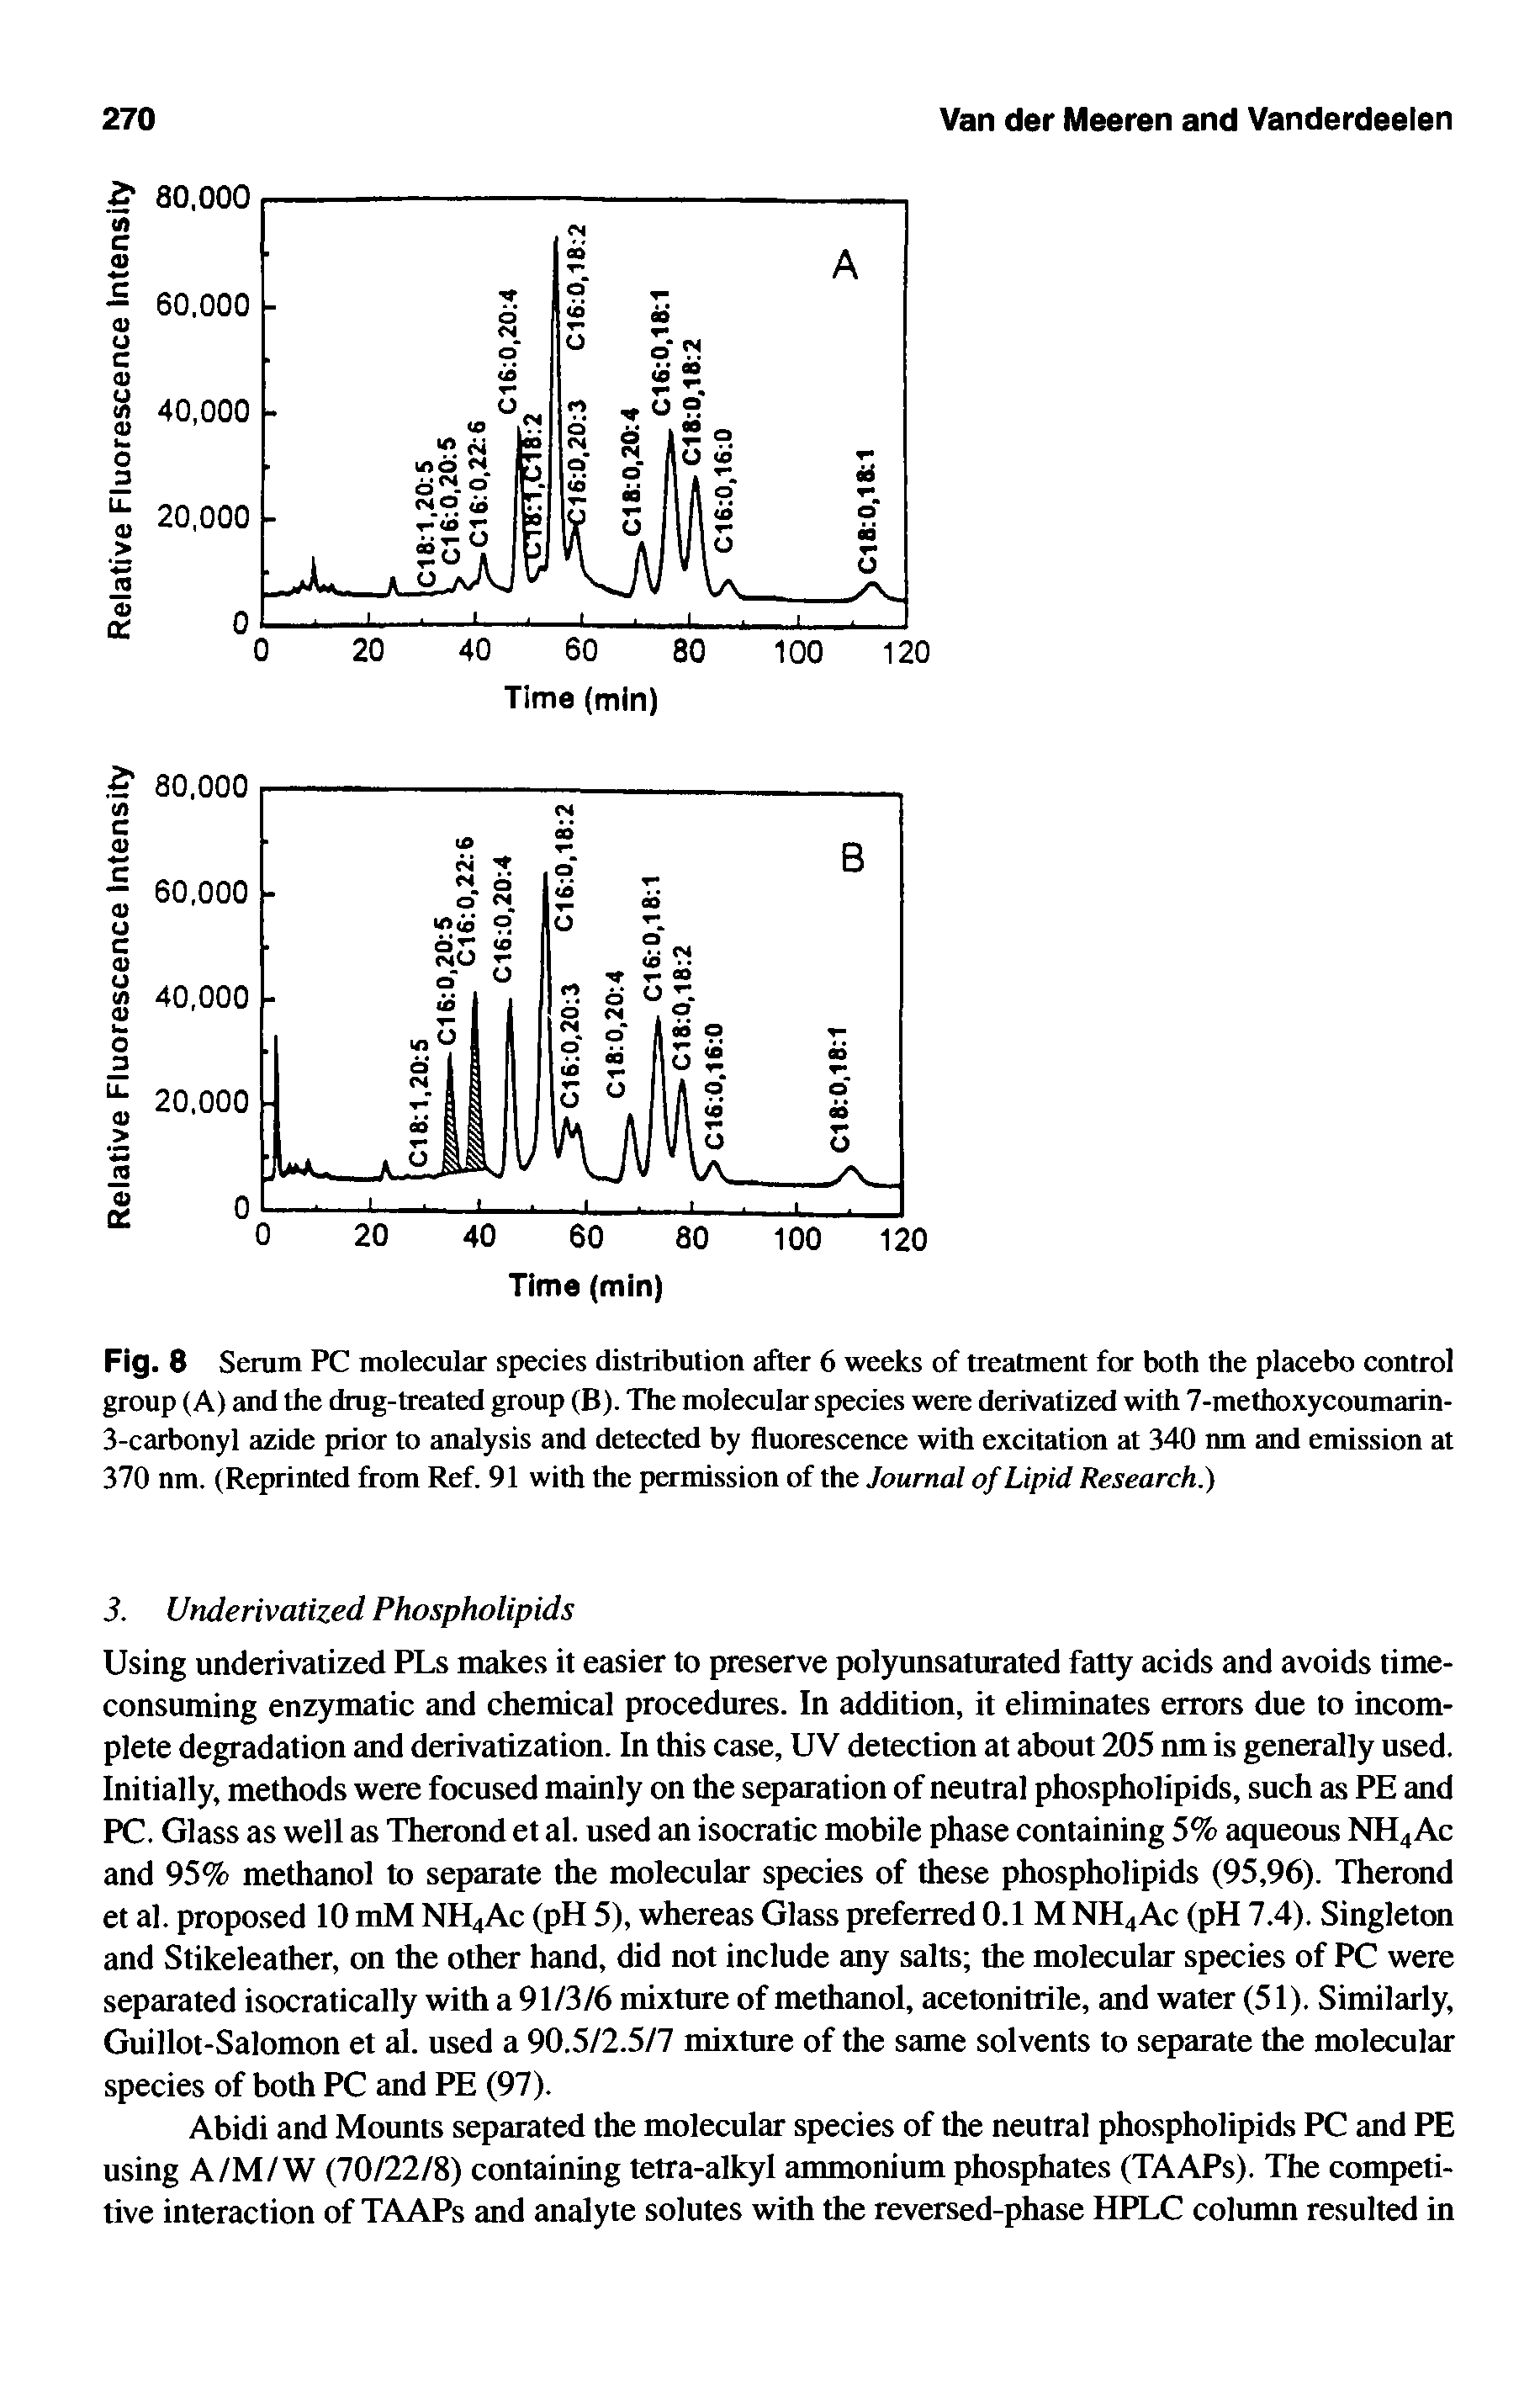 Fig. 8 Serum PC molecular species distribution after 6 weeks of treatment for both the placebo control group (A) and the drug-treated group (B). The molecular species were derivatized with 7-methoxycoumarin-3-carbonyl azide prior to analysis and detected by fluorescence with excitation at 340 nm and emission at 370 nm. (Reprinted from Ref. 91 with the permission of the Journal of Lipid Research.)...